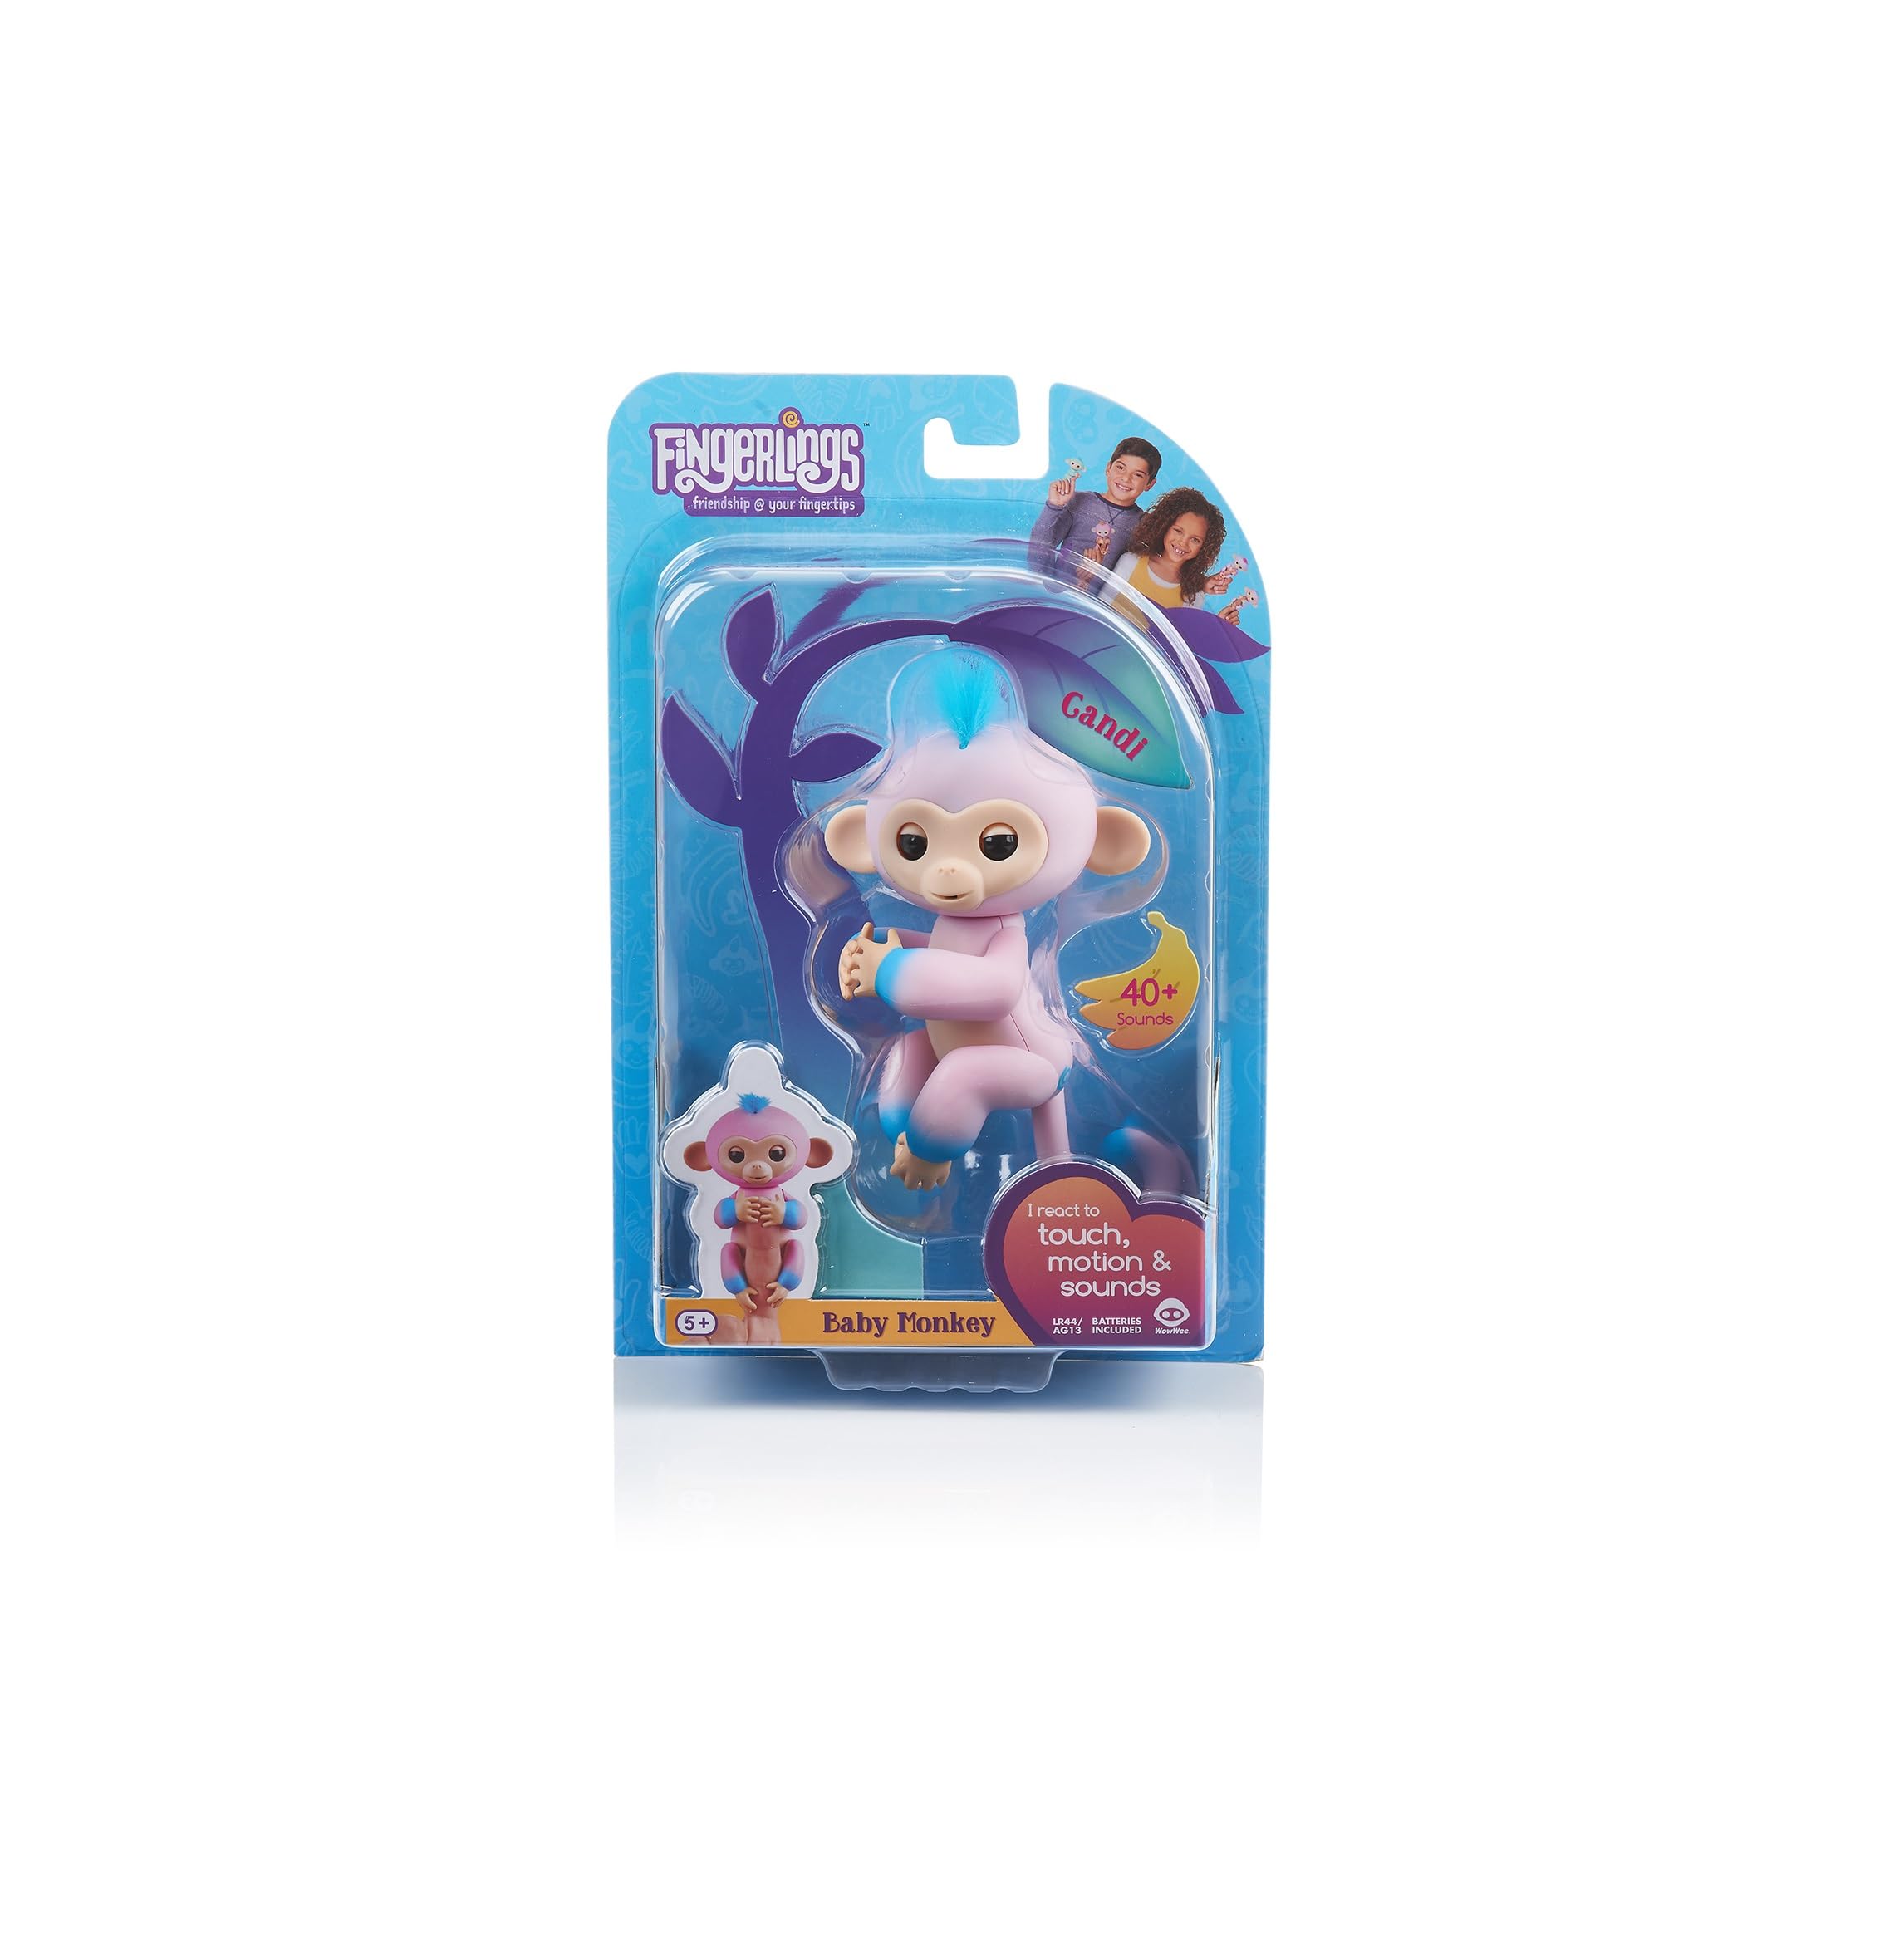 WowWee Fingerlings 2Tone Monkey - candi (Pink with Blue Accents) - Interactive Baby Pet (3722)